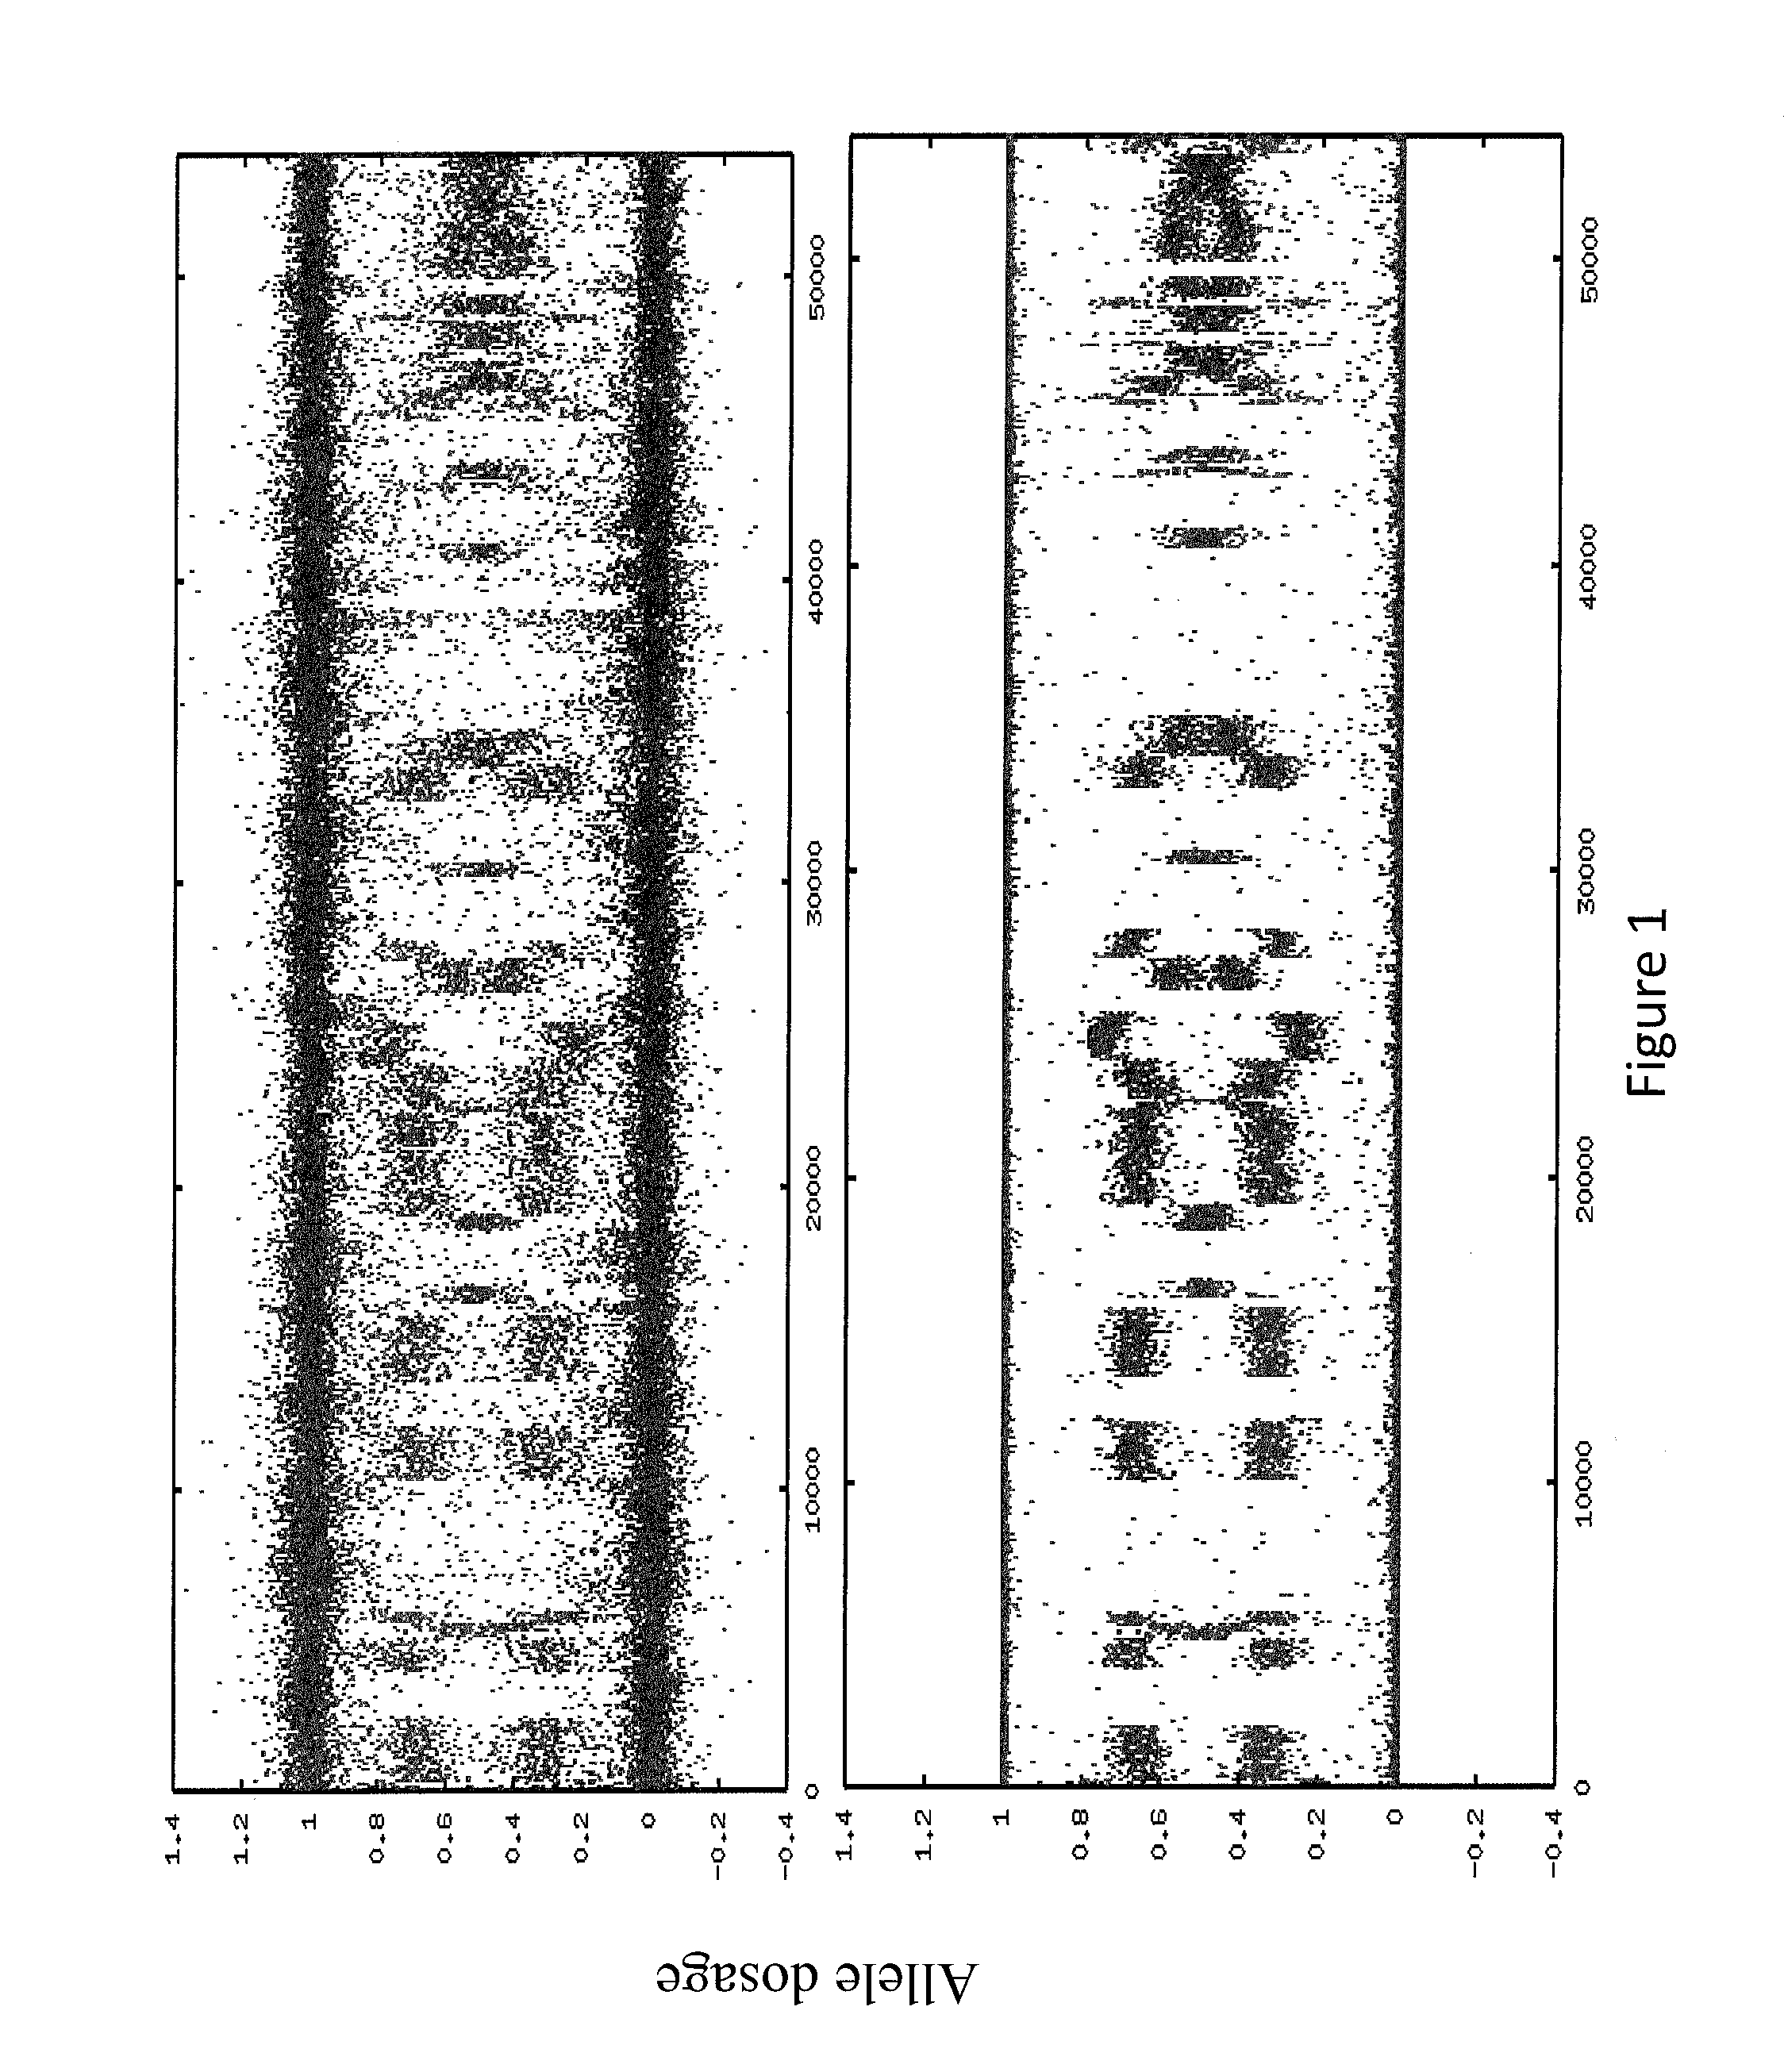 Methods and materials for assessing homologous recombination deficiency